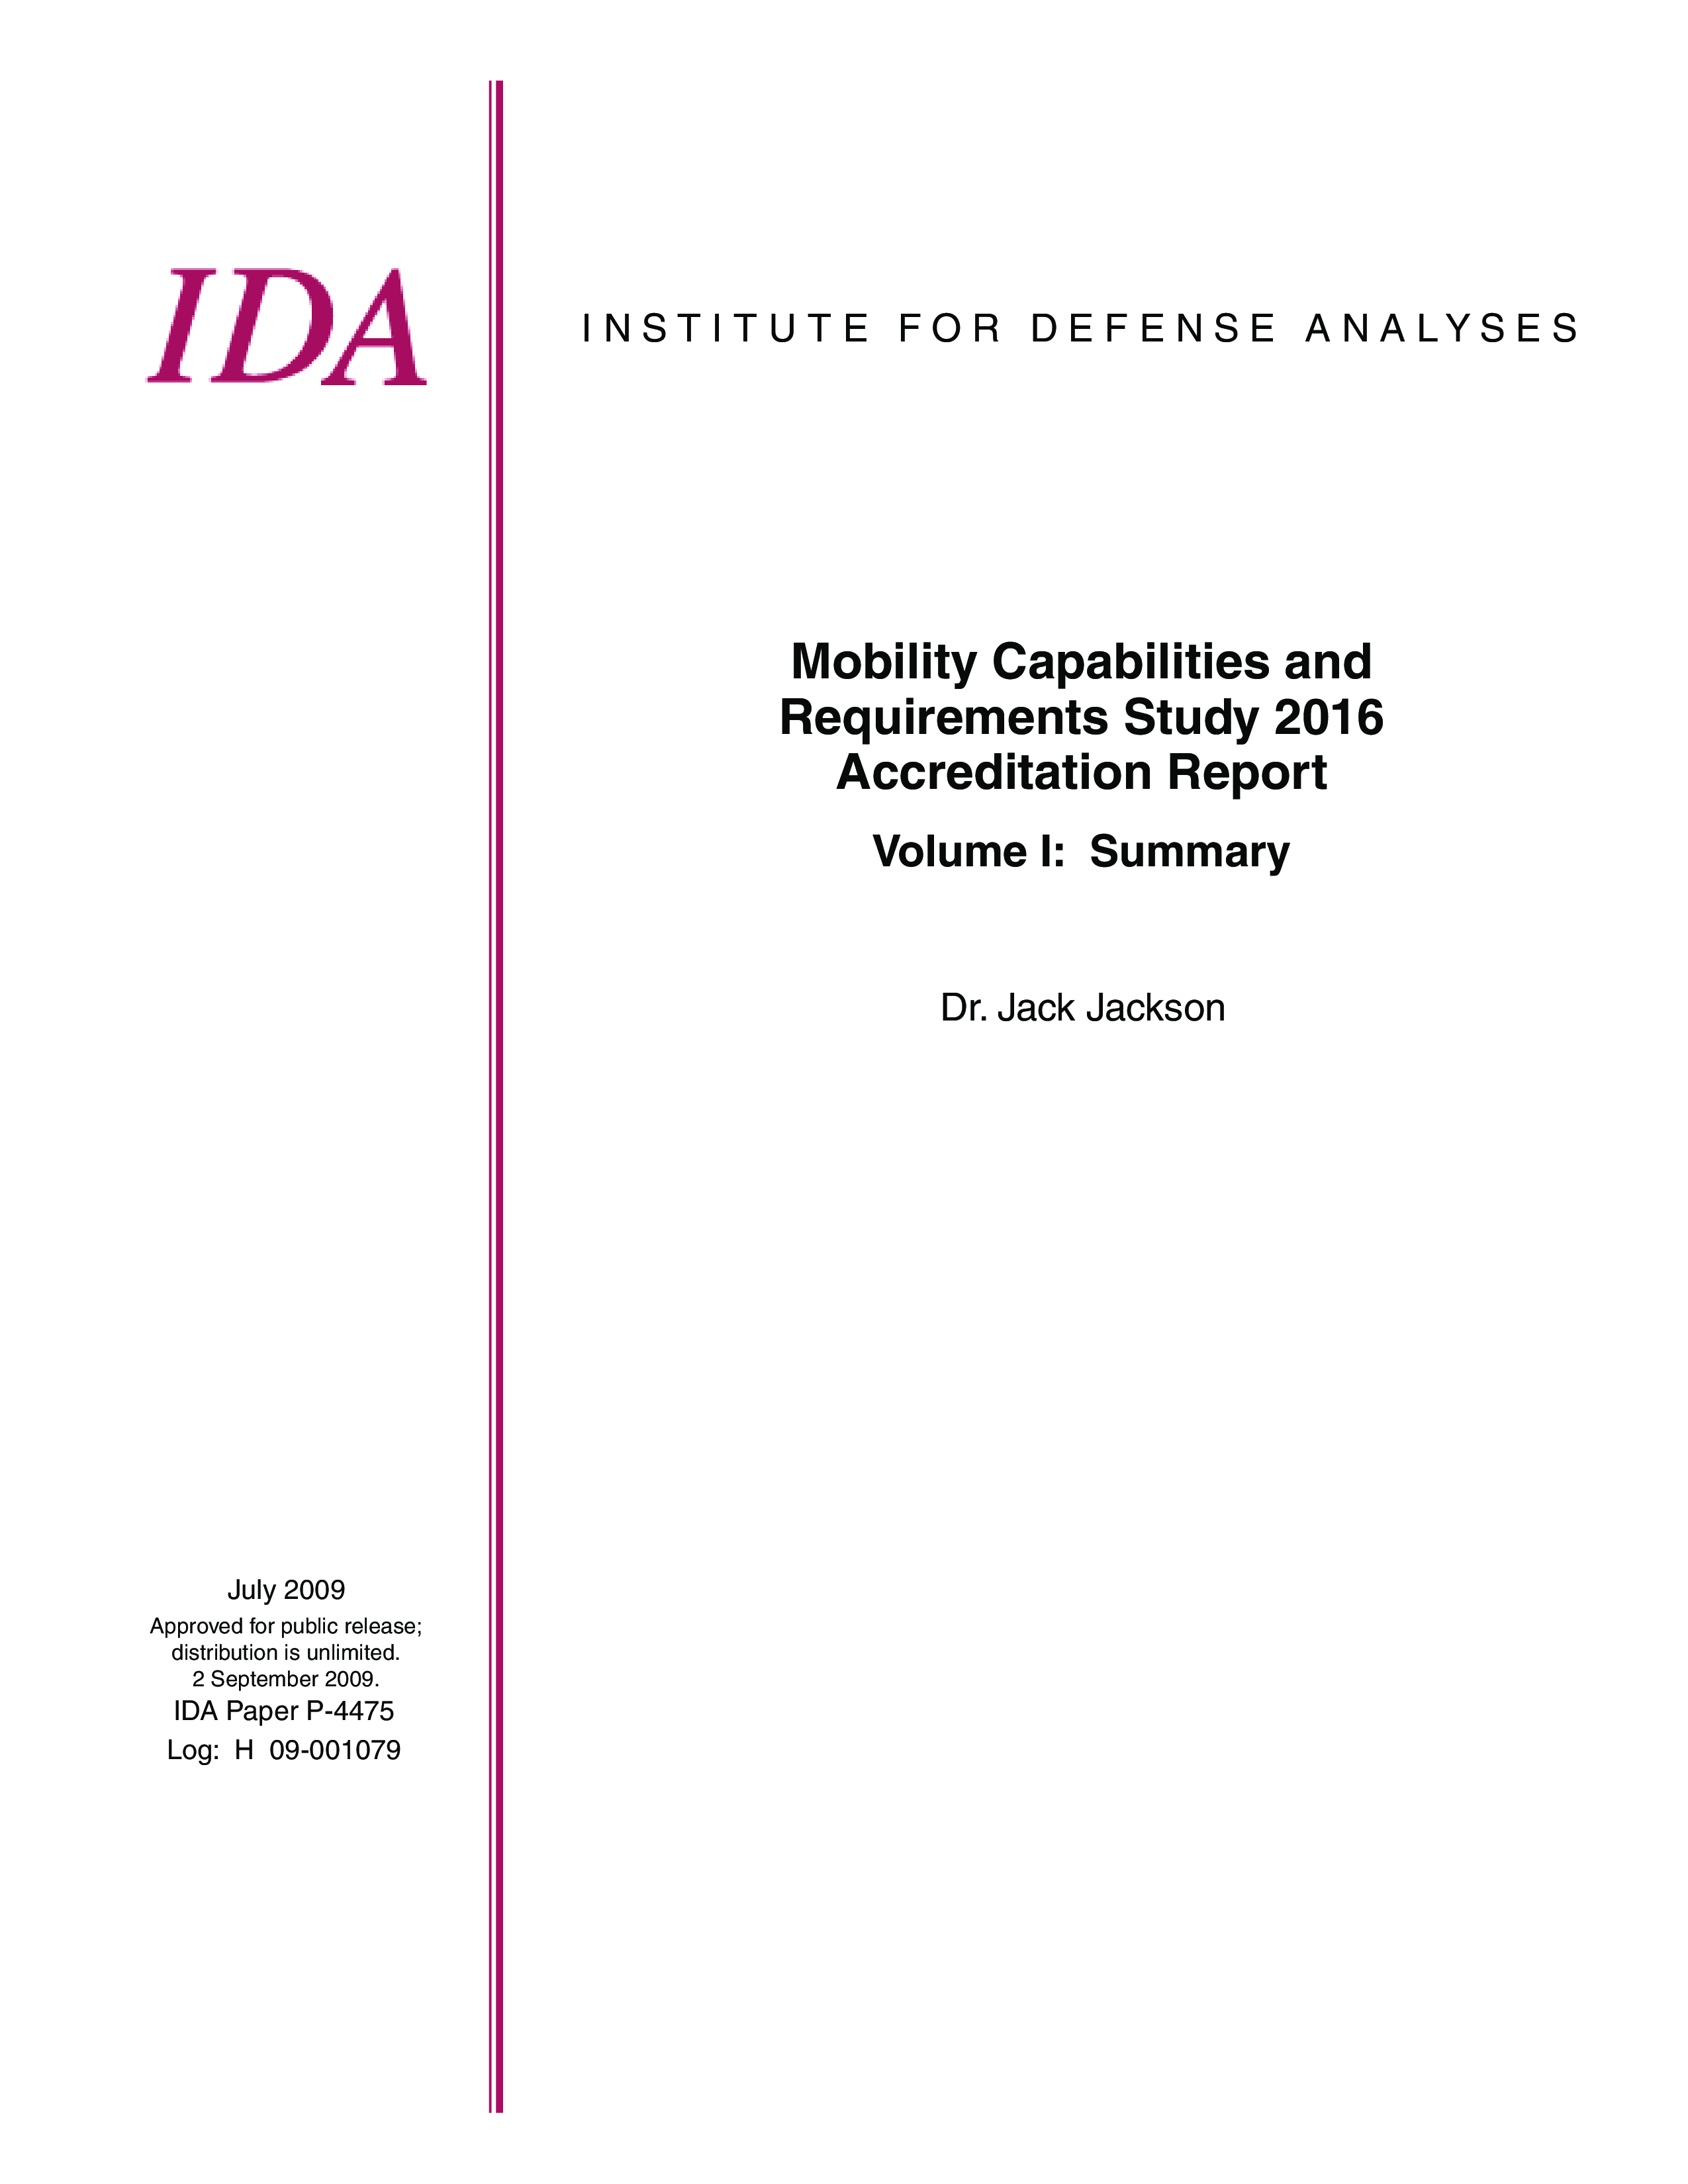 Mobility Capabilities and Requirements Study 2016 Accreditation Report Volume I: Summary